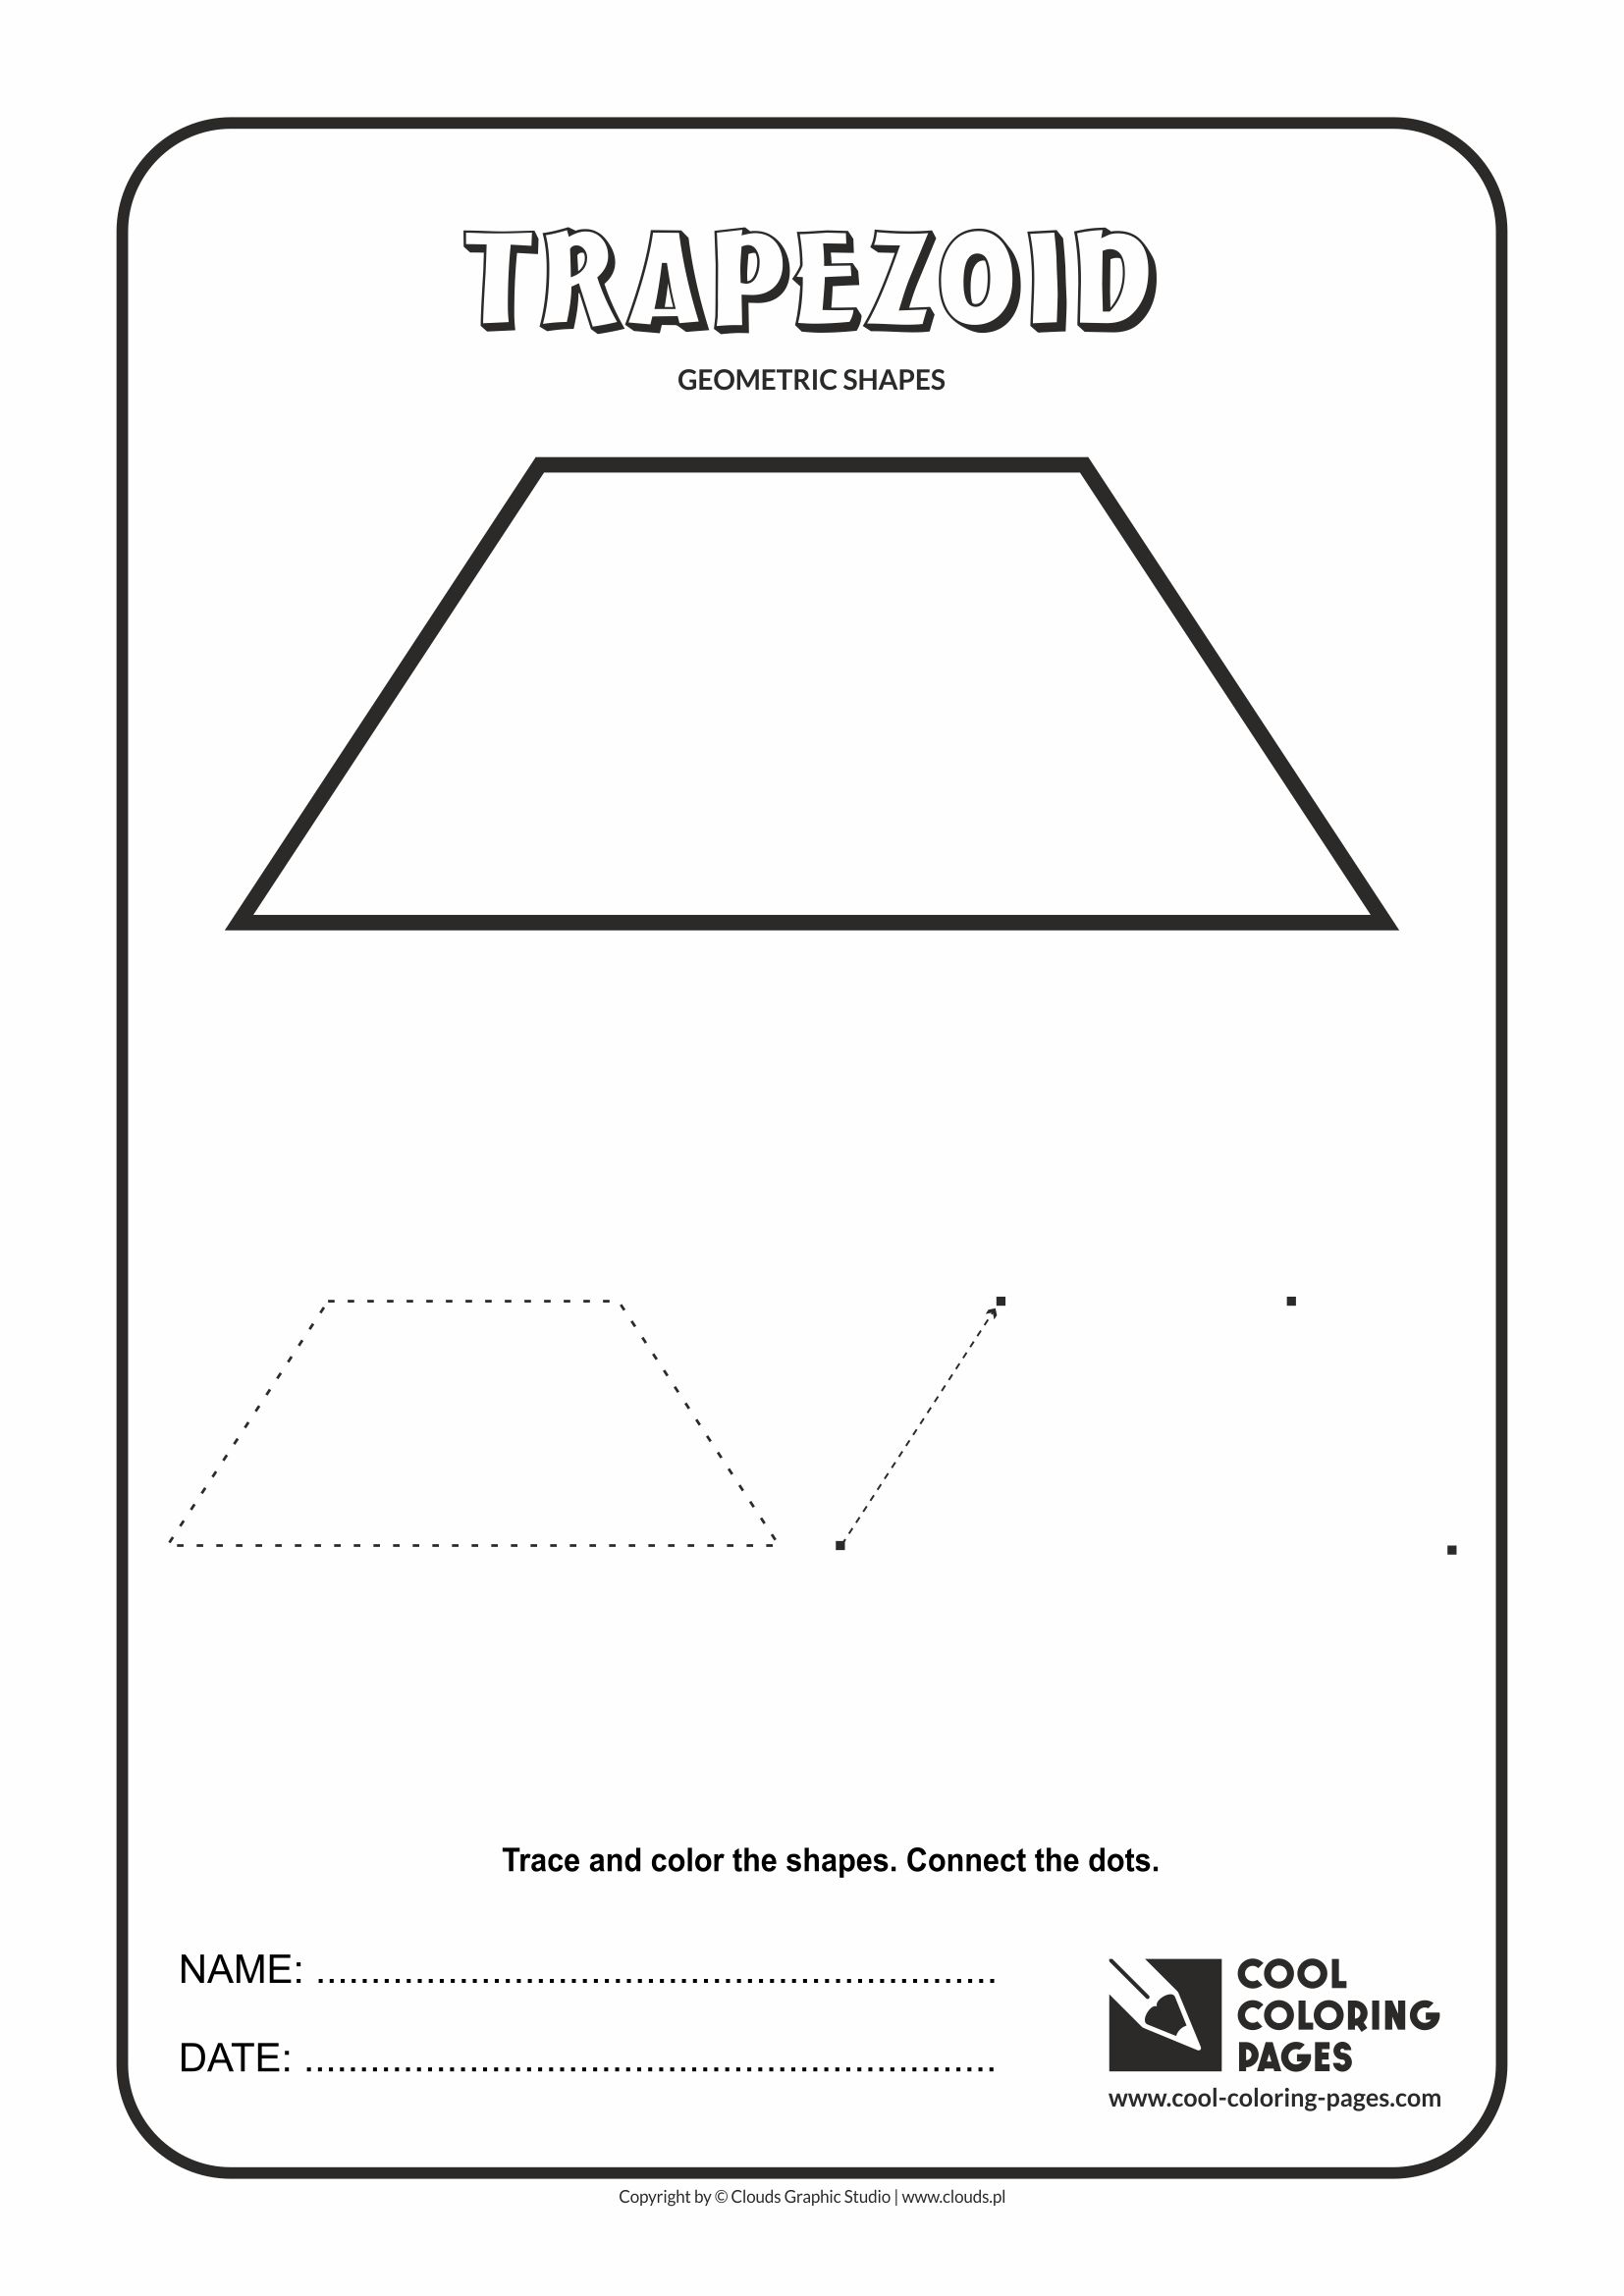 Cool Coloring Pages - Geometric shapes / Trapezoid